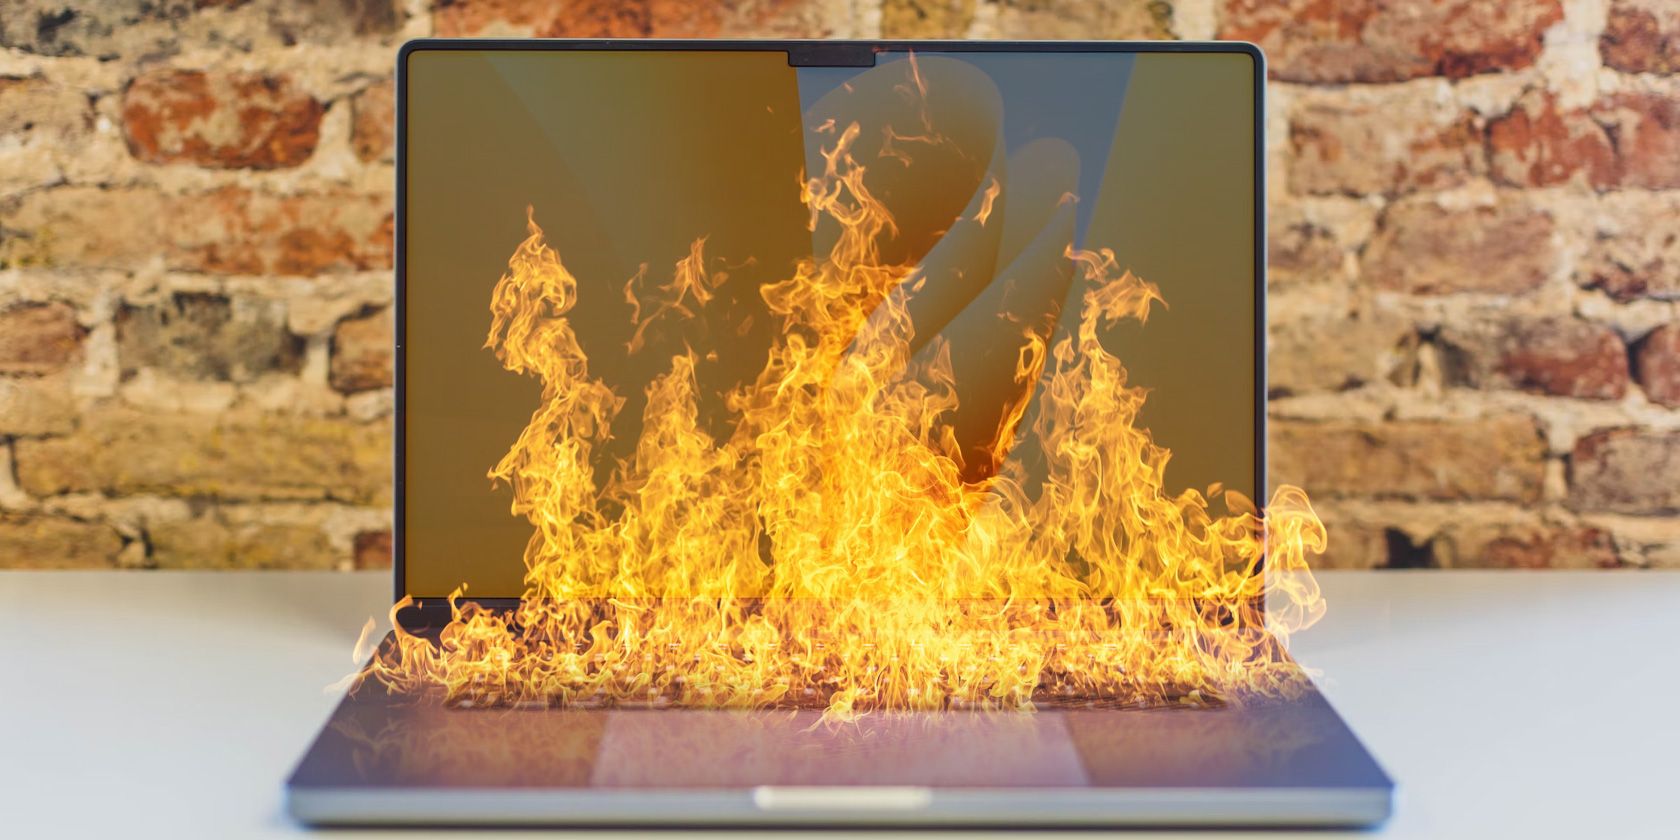 MacBook Pro with fire on it